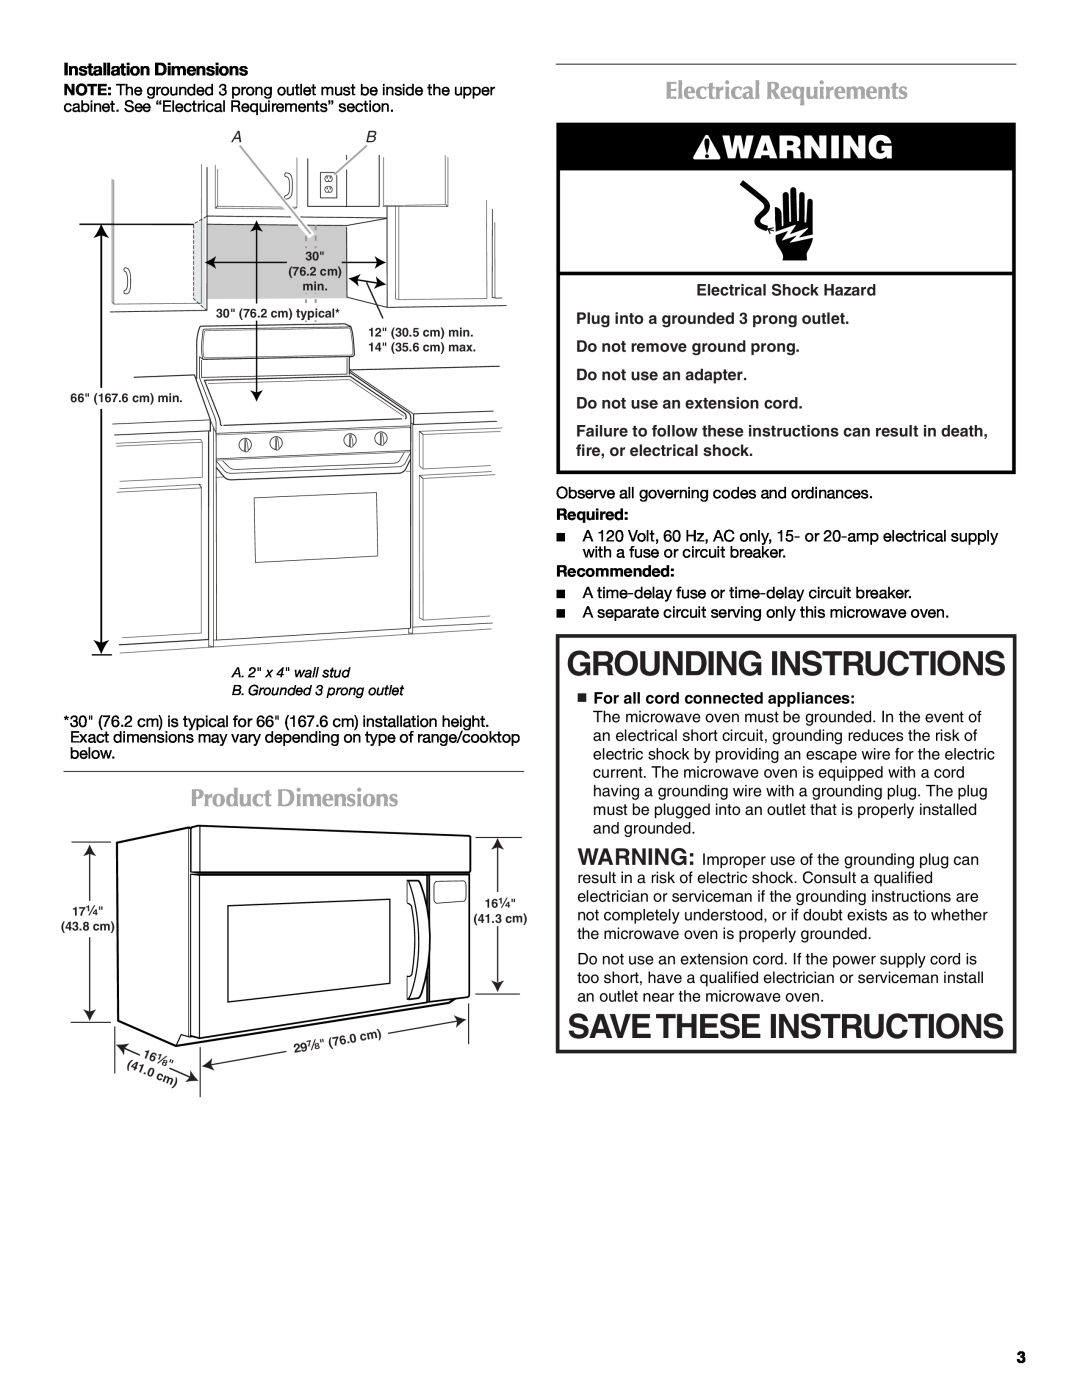 Maytag MMV5208WS Product Dimensions, Electrical Requirements, Installation Dimensions, Do not use an extension cord 